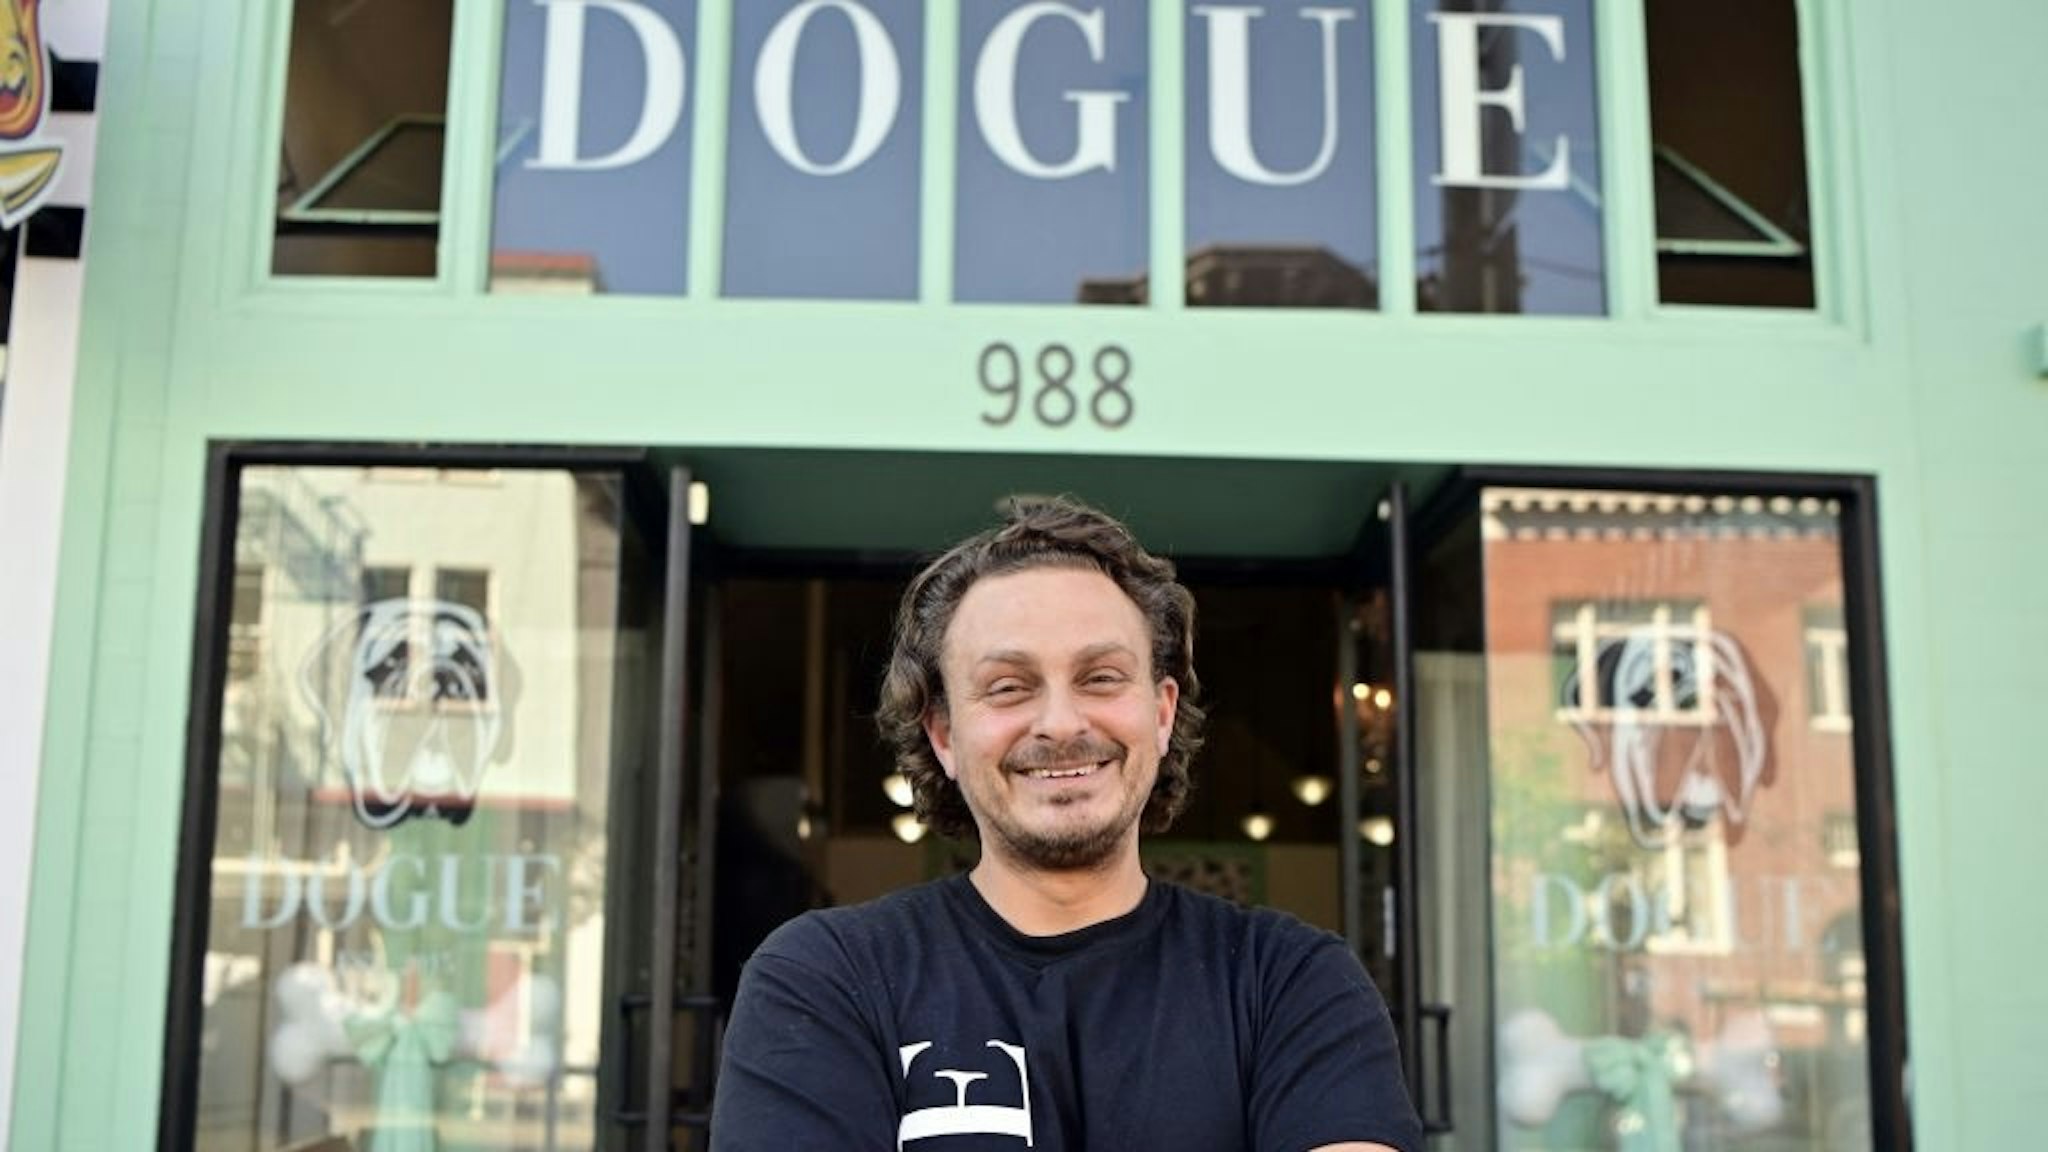 US-ANIMAL-DOG-OFFBEAT Rahmi Massarweh, owner of Dogue, a restaurant for dogs, stands in front of his restaurant in San Francisco, California on October 5, 2022. - Does your dog like fine dining? Does your pooch like posh nosh? Then one US eatery has just the thing. At Dogue in San Francisco, four-legged friends have their pick of the very best foods available, with a menu designed to please even the most exacting canine palate. (Photo by JOSH EDELSON / AFP) (Photo by JOSH EDELSON/AFP via Getty Images) JOSH EDELSON / Contributor